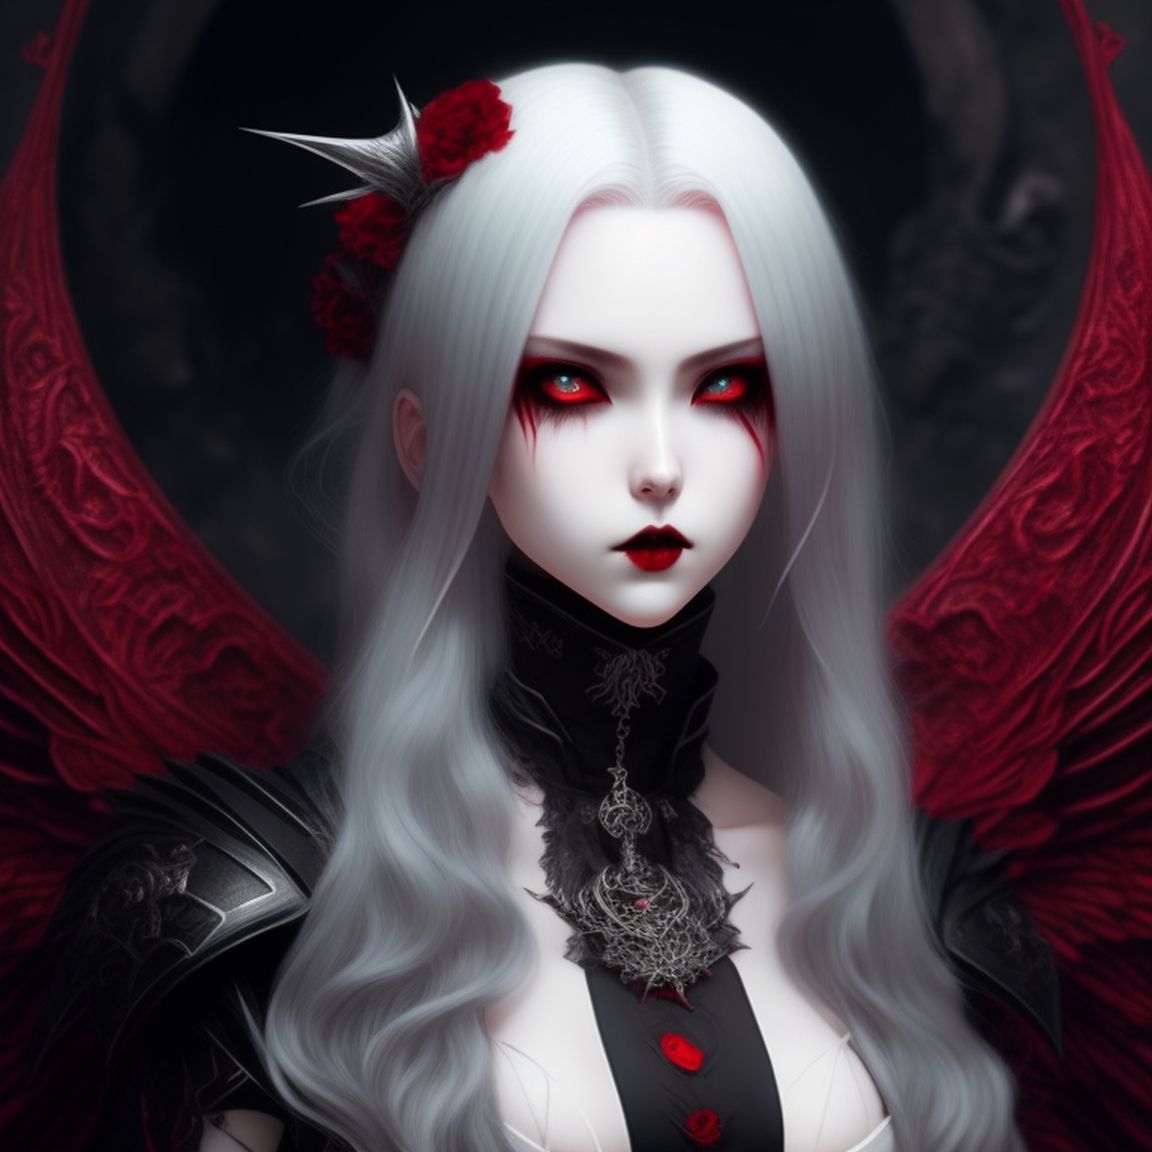 vampire anime girl with silver hair and red eyes